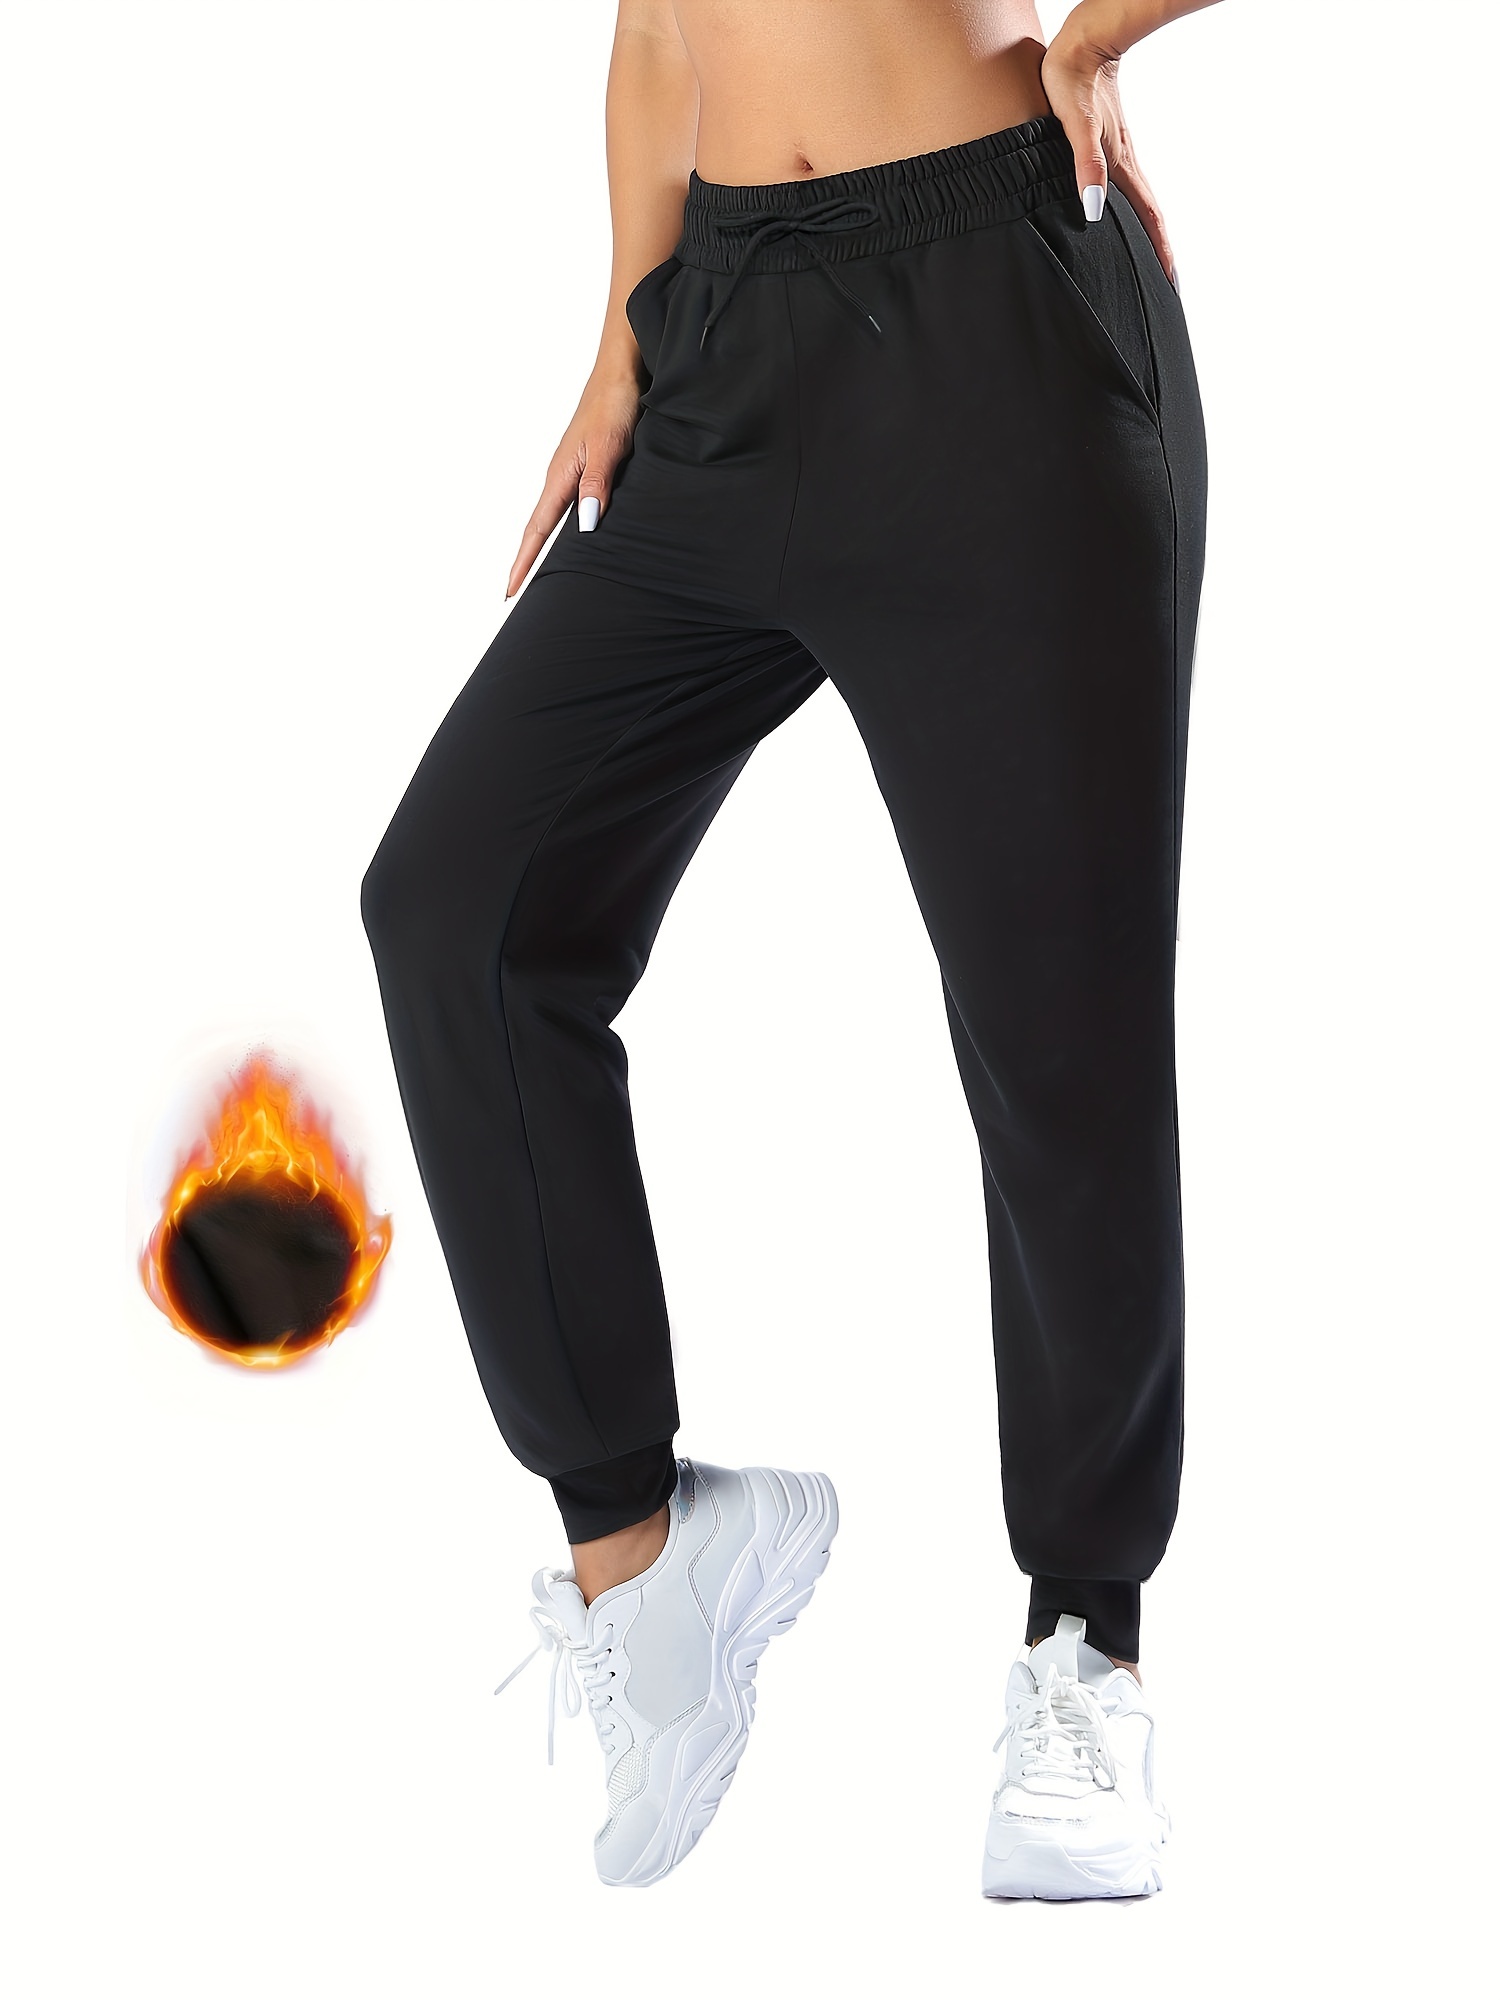  Women's Elastic Waist Joggers Baggy Casual Sweatpants Solid  Color Workout Athletic Sports Pants Casual Pants (Black, XL) : Clothing,  Shoes & Jewelry